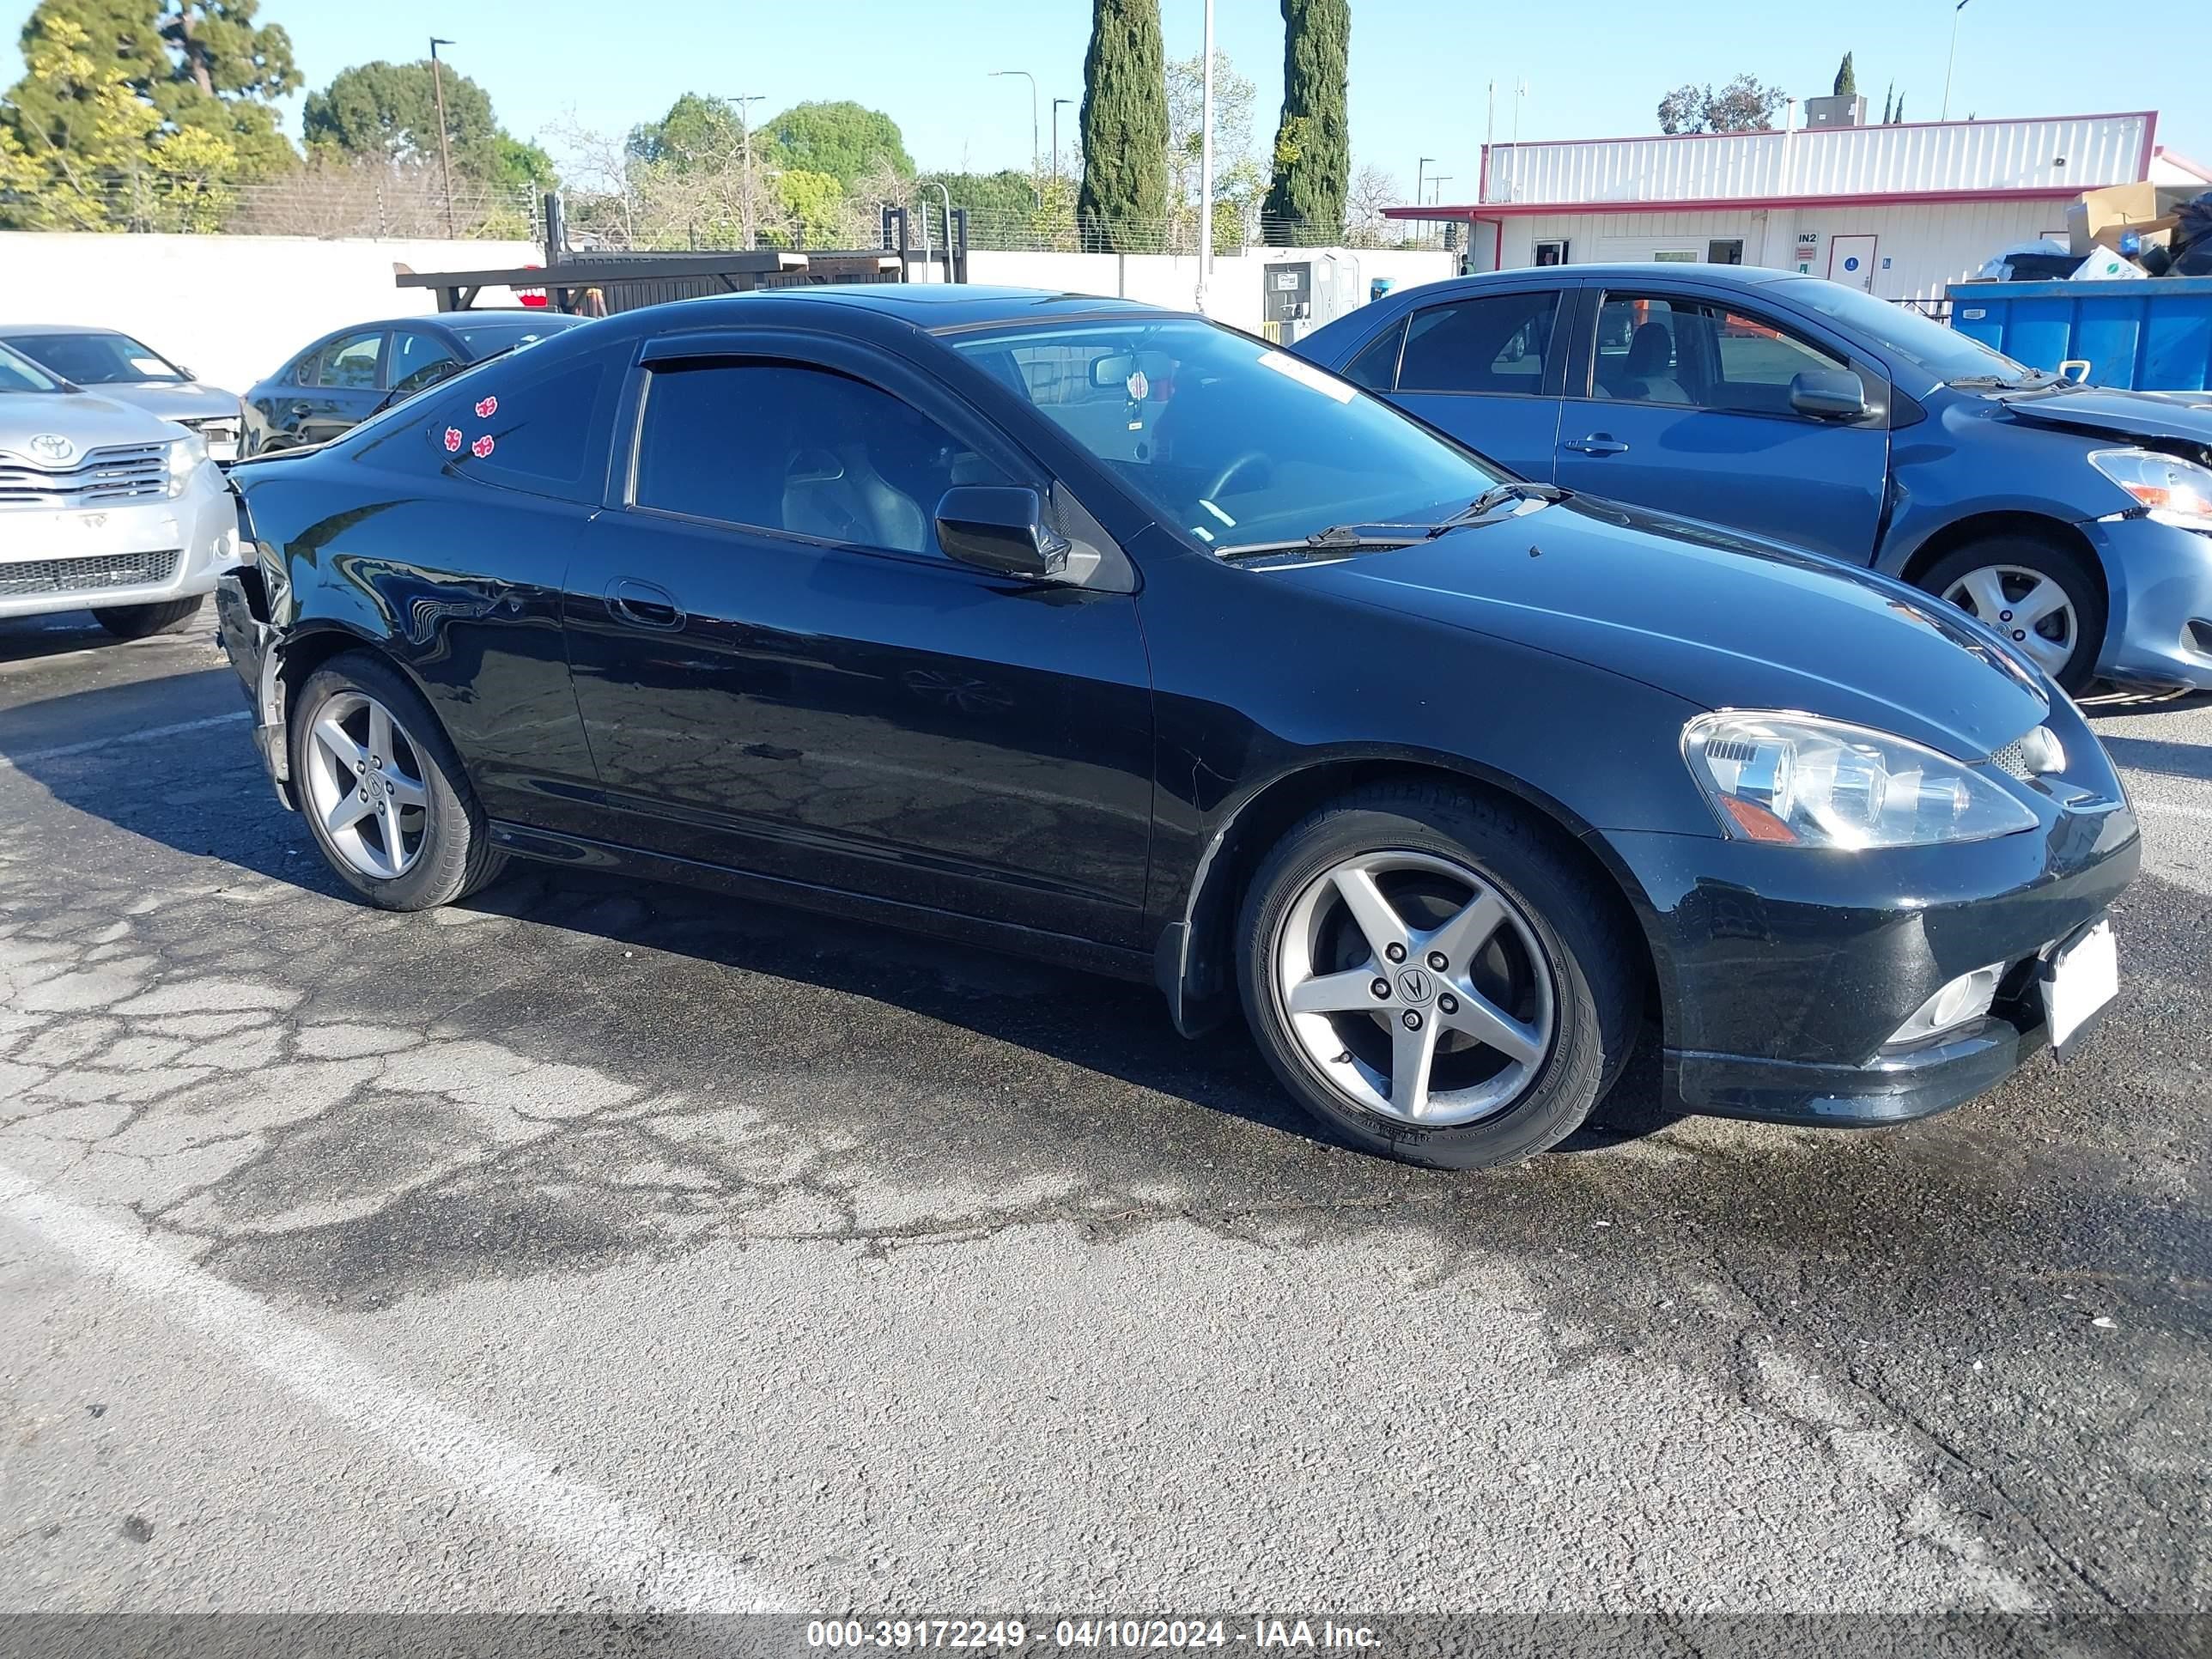 VIN: JH4DC54895S012857 ACURA RSX 2005